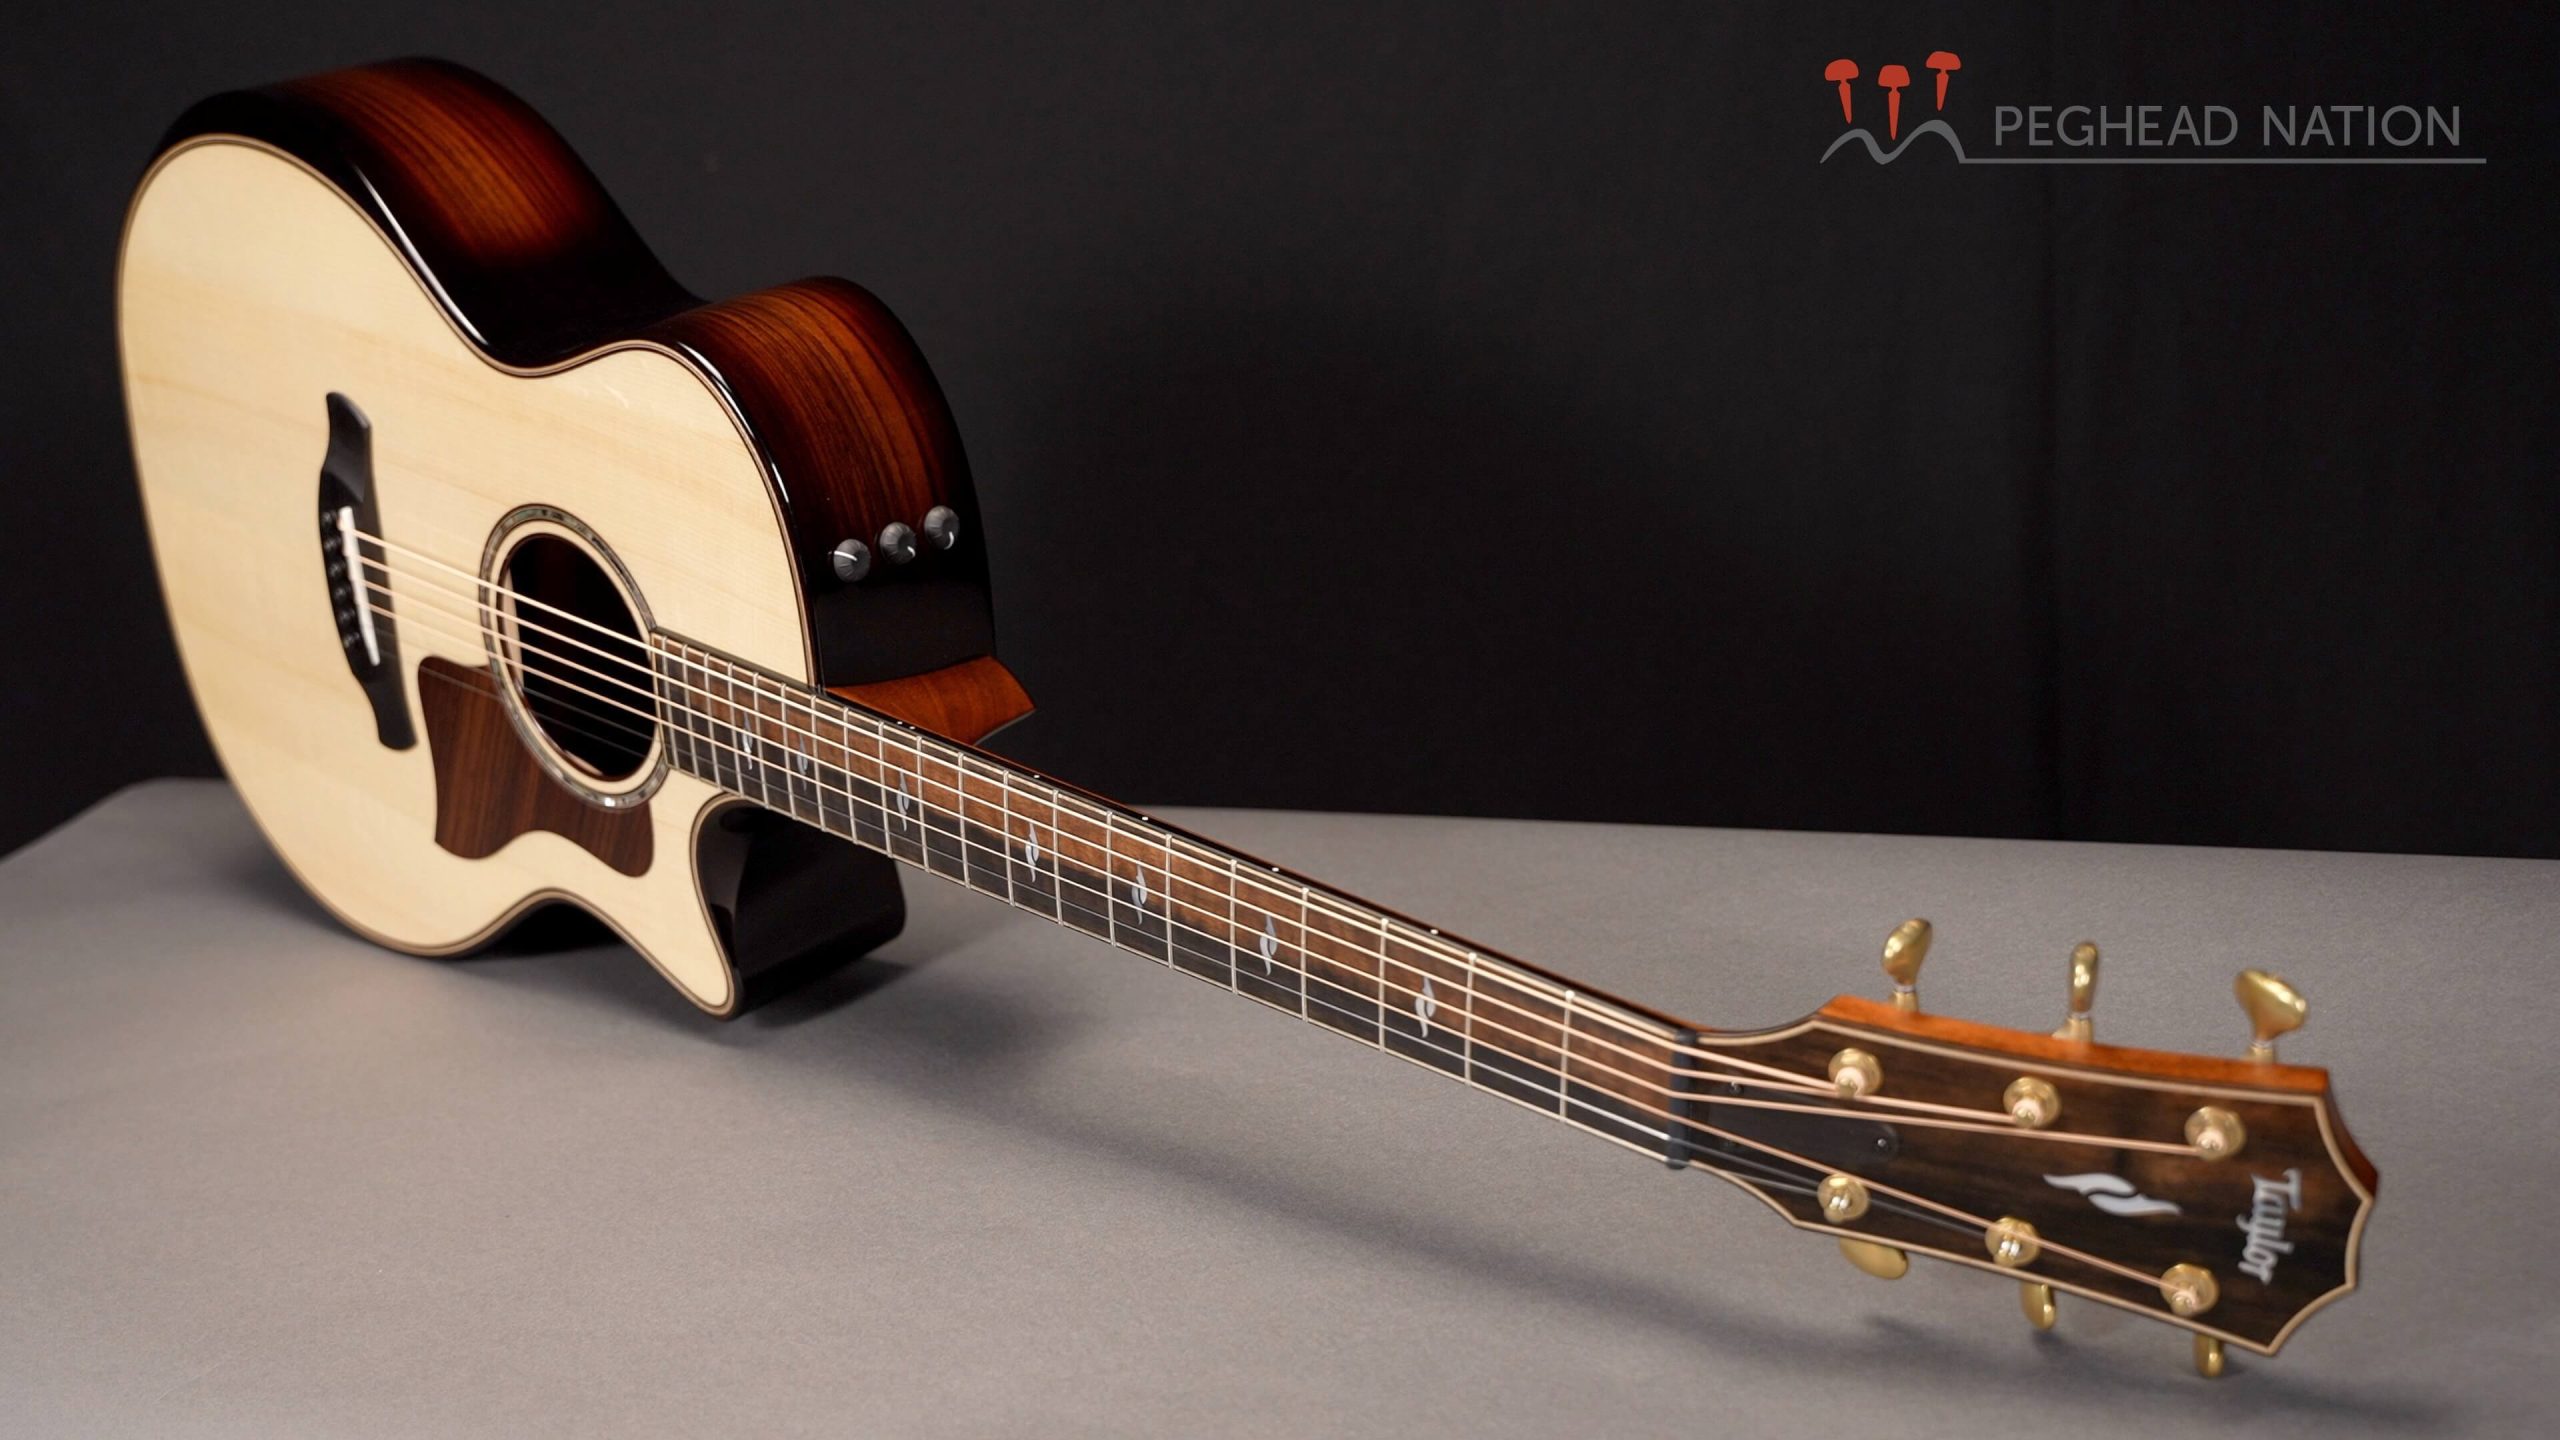 Taylor Builder's Edition 814ce - Peghead Nation